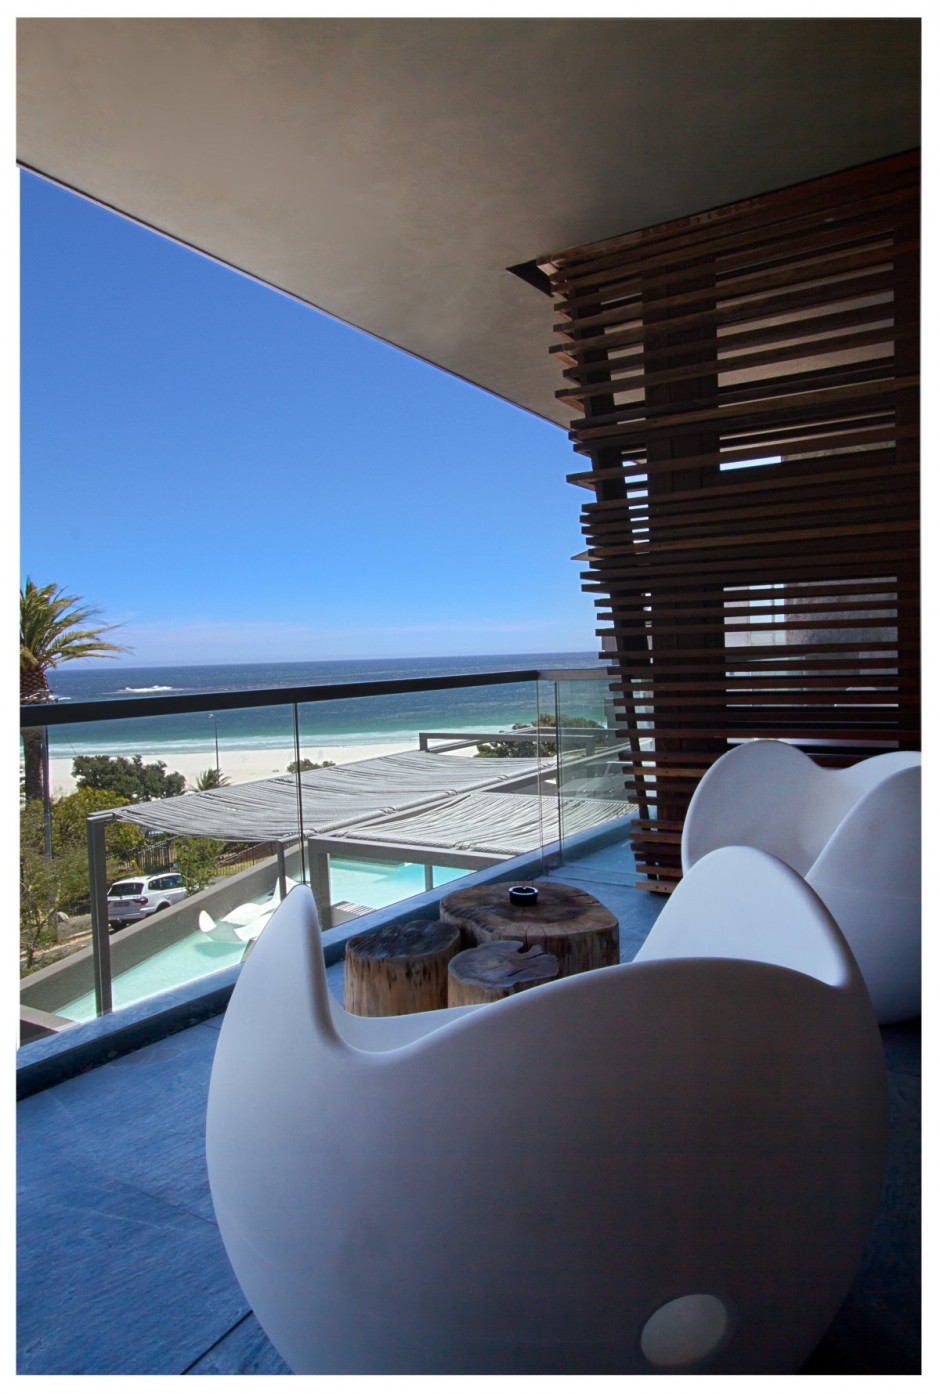 POD Hotel by Greg Wright Architects | Camps Bay, South Africa